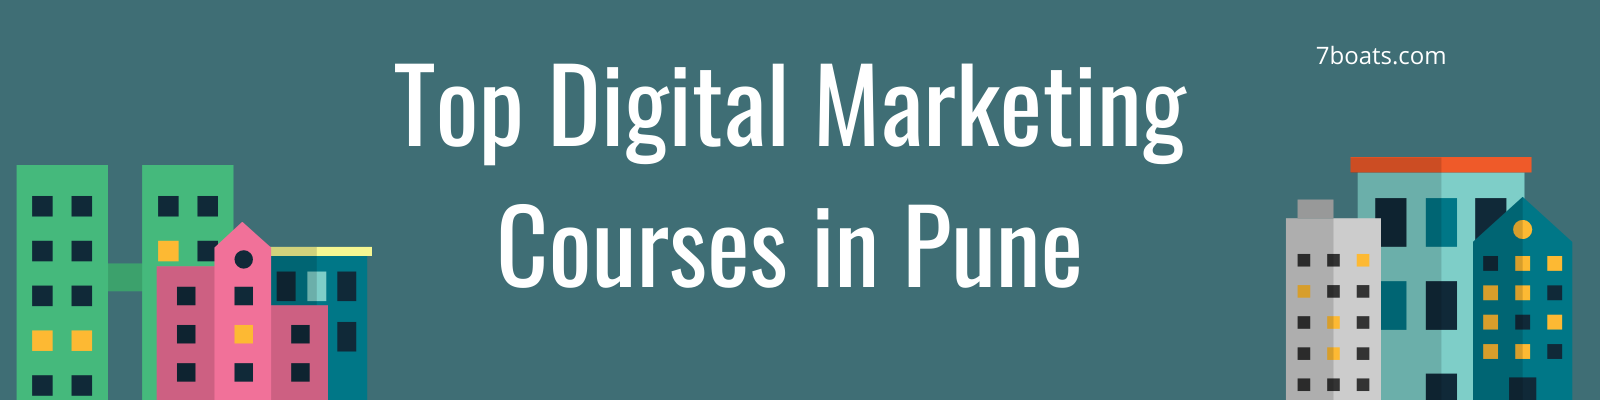 Best Digital Marketing Institutes in Pune with Online & Classroom Digital Marketing Training Courses